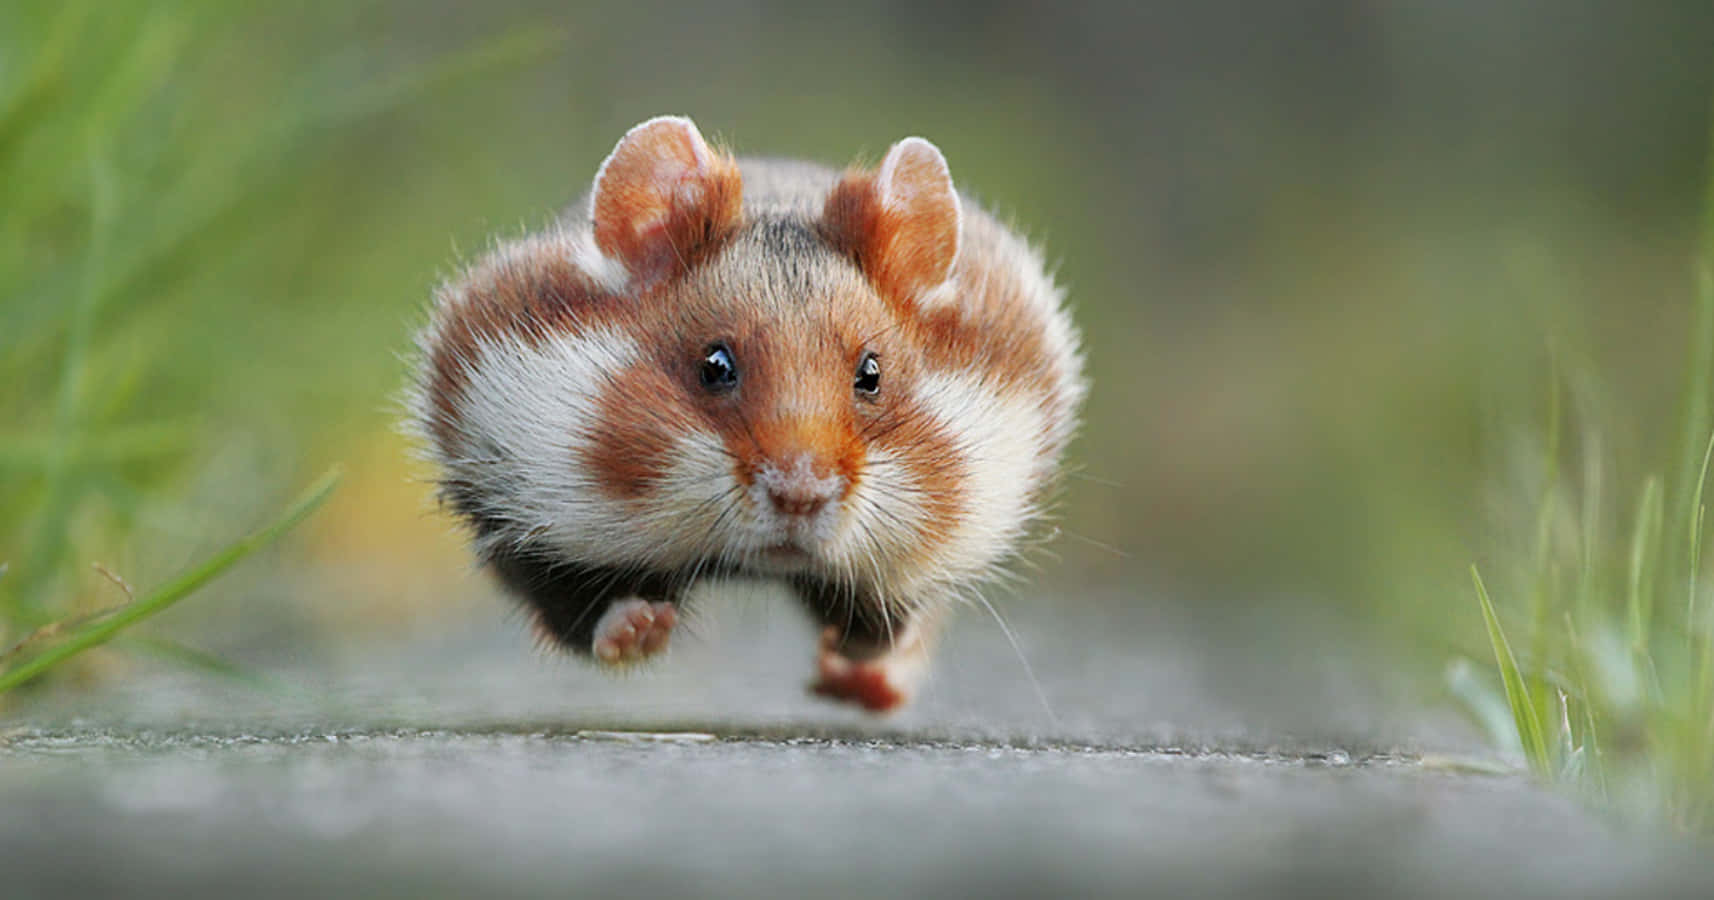 Funny Animal Running Squirrel Fluffy Cheeks Pictures